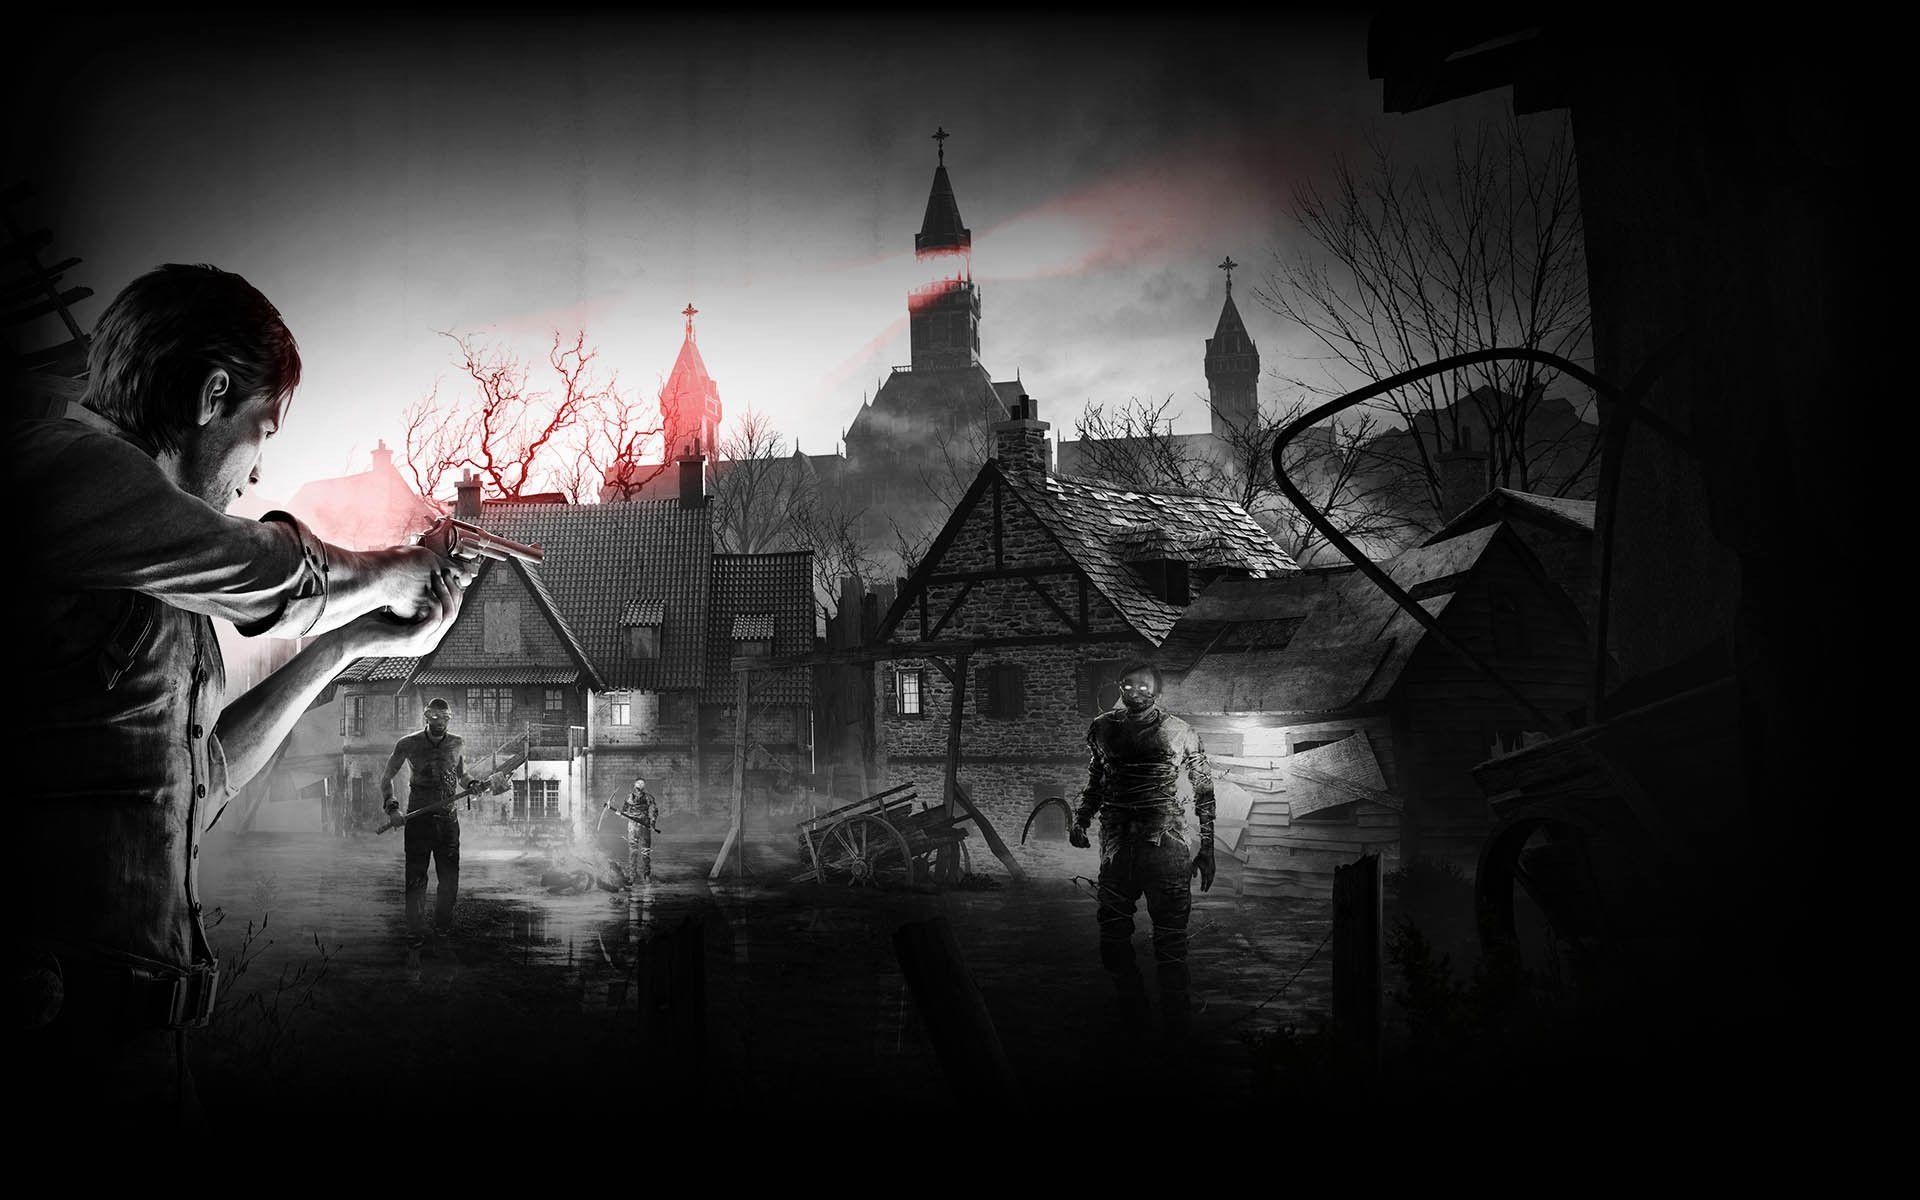 download the evil within steam